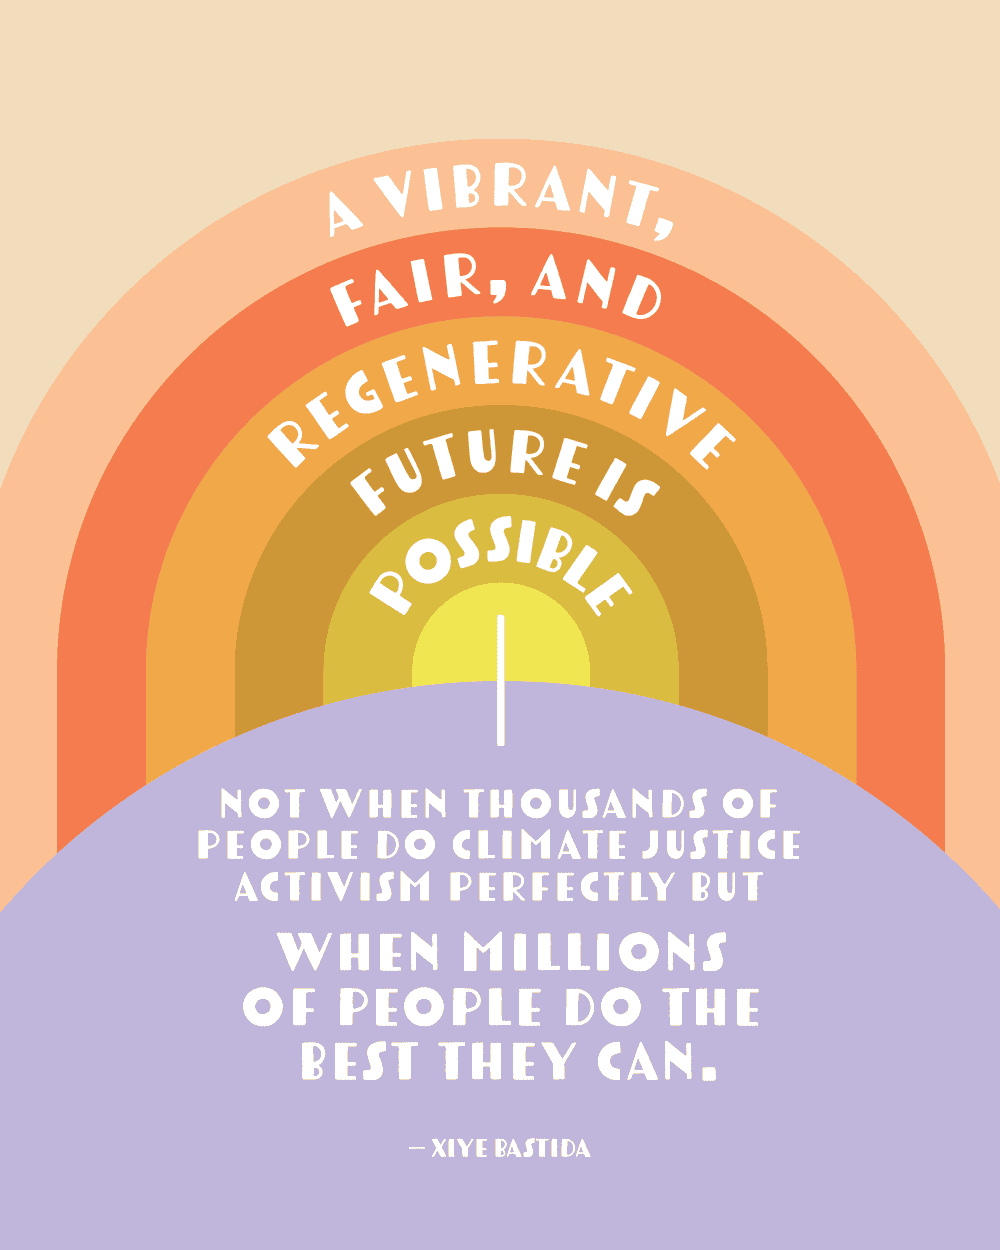 Phone background / Instagram quote art: A vibrant, fair, and regenerative future is possible—not when thousands of people do climate justice activism perfectly but when millions of people do the best they can.  Xiye Bastida